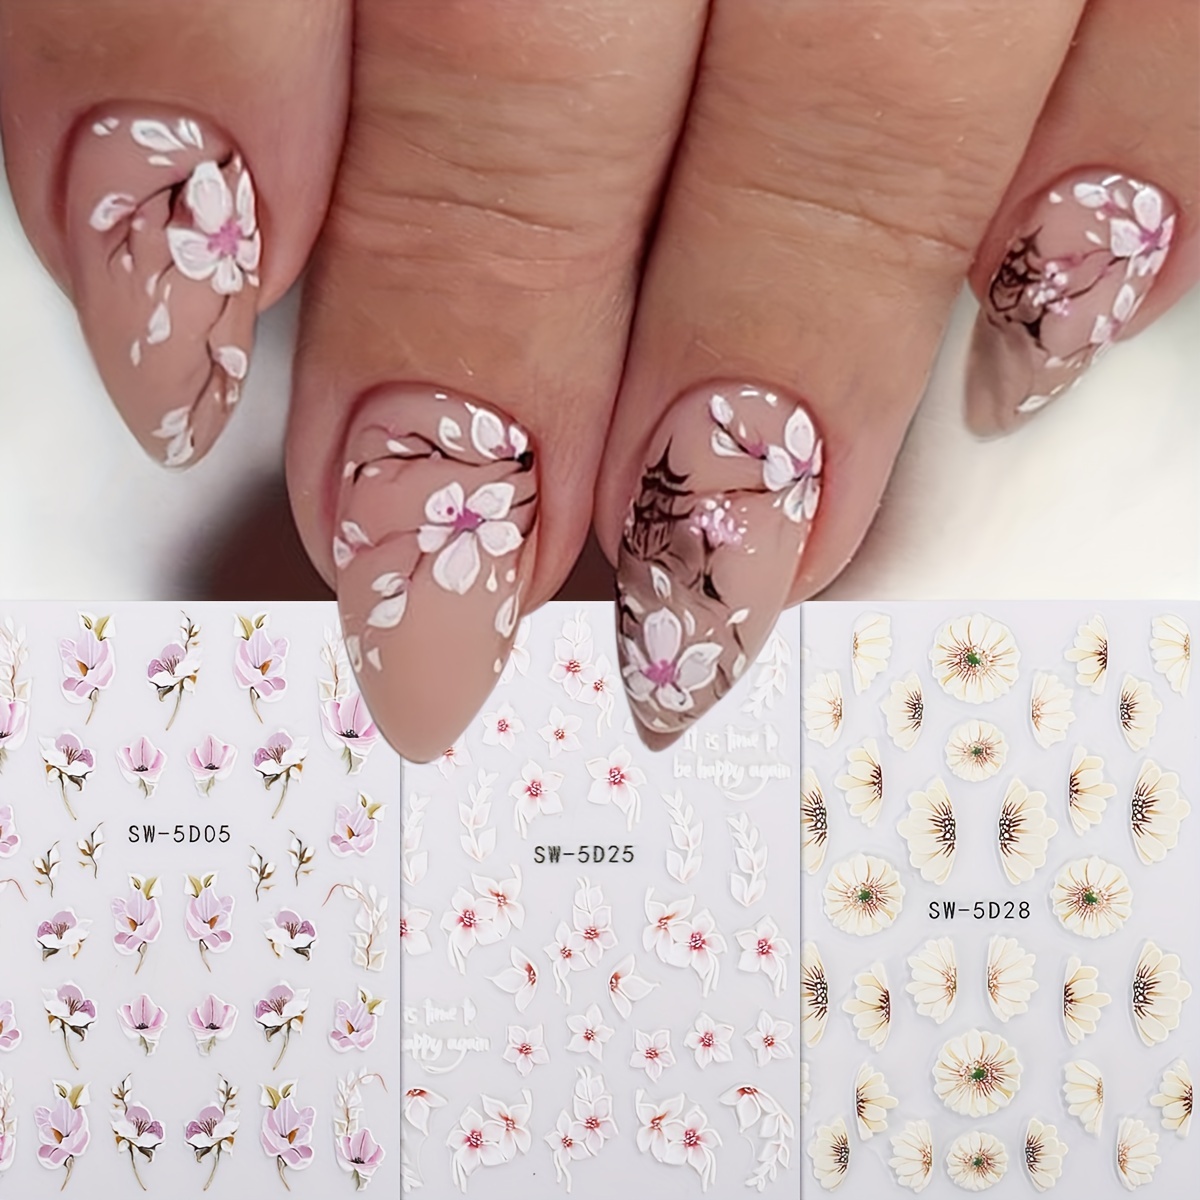 5D Flowers Nail Art Embossed Floral Stickers Self Adhesive Nail Sliders  Decal DIY Nail Art Decoration – the best products in the Joom Geek online  store